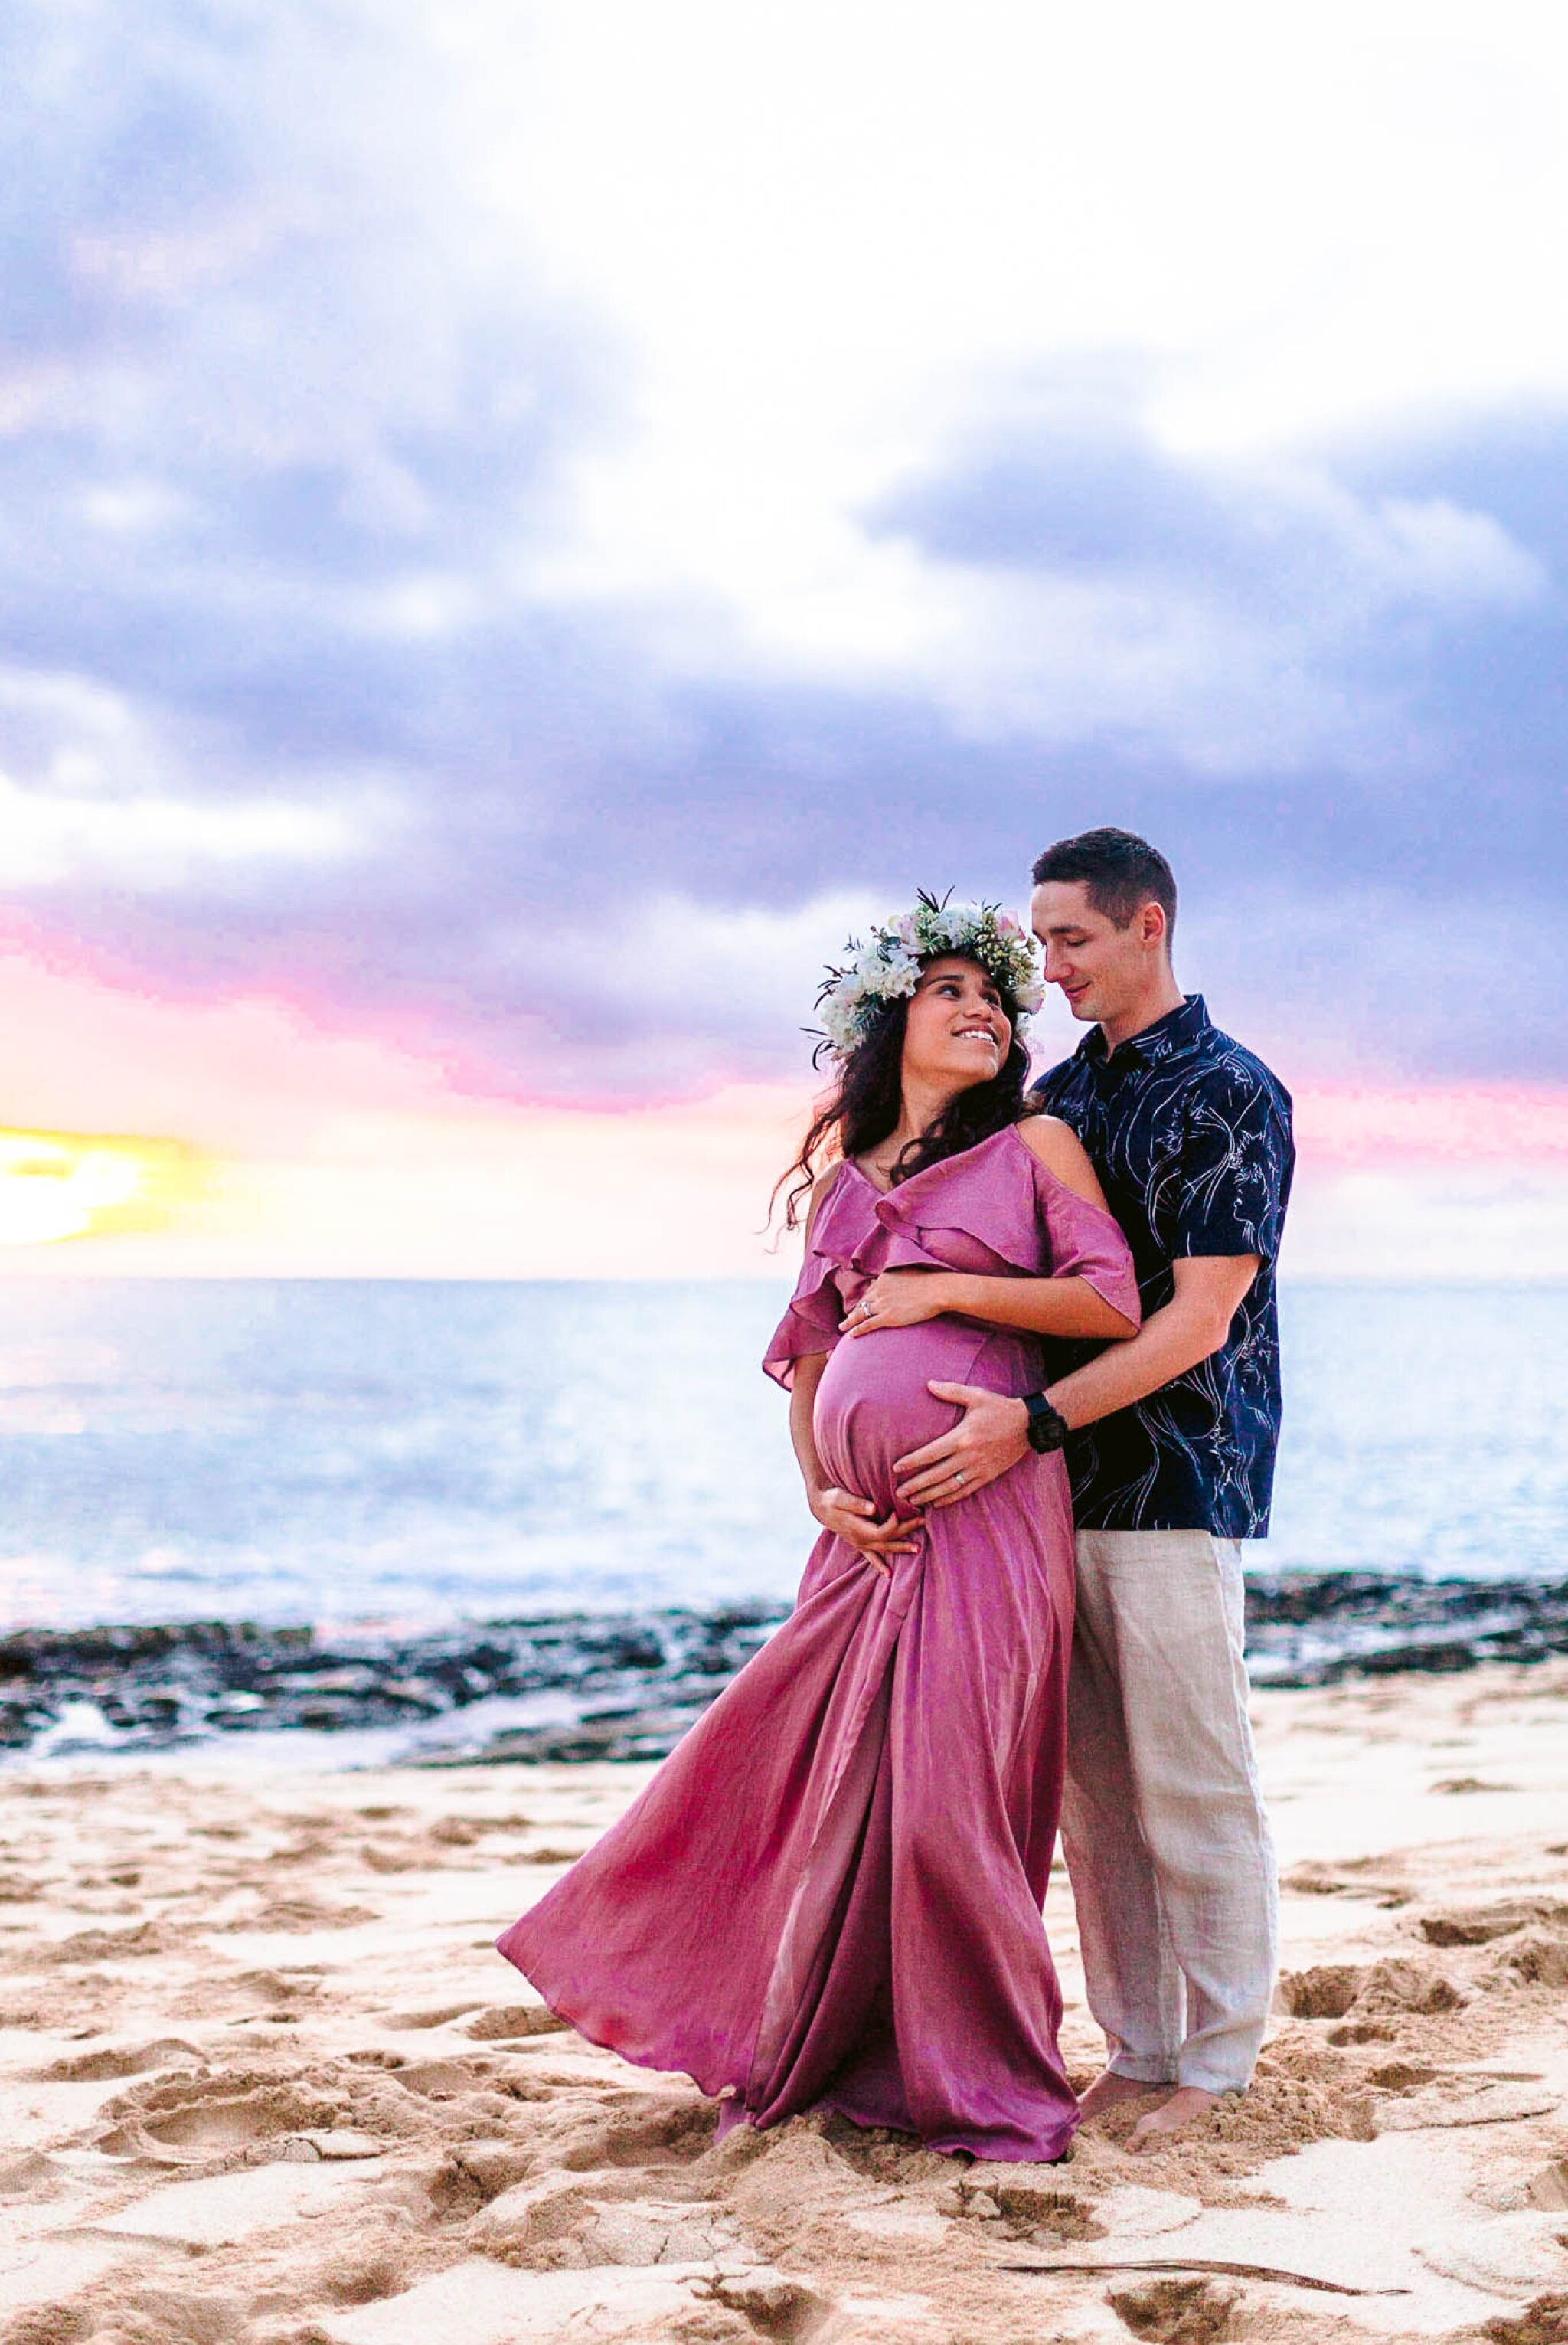 Ruth - Maternity Photography Session at Maili Beach Park, West side oahu - hawaii family photographer 20.jpg